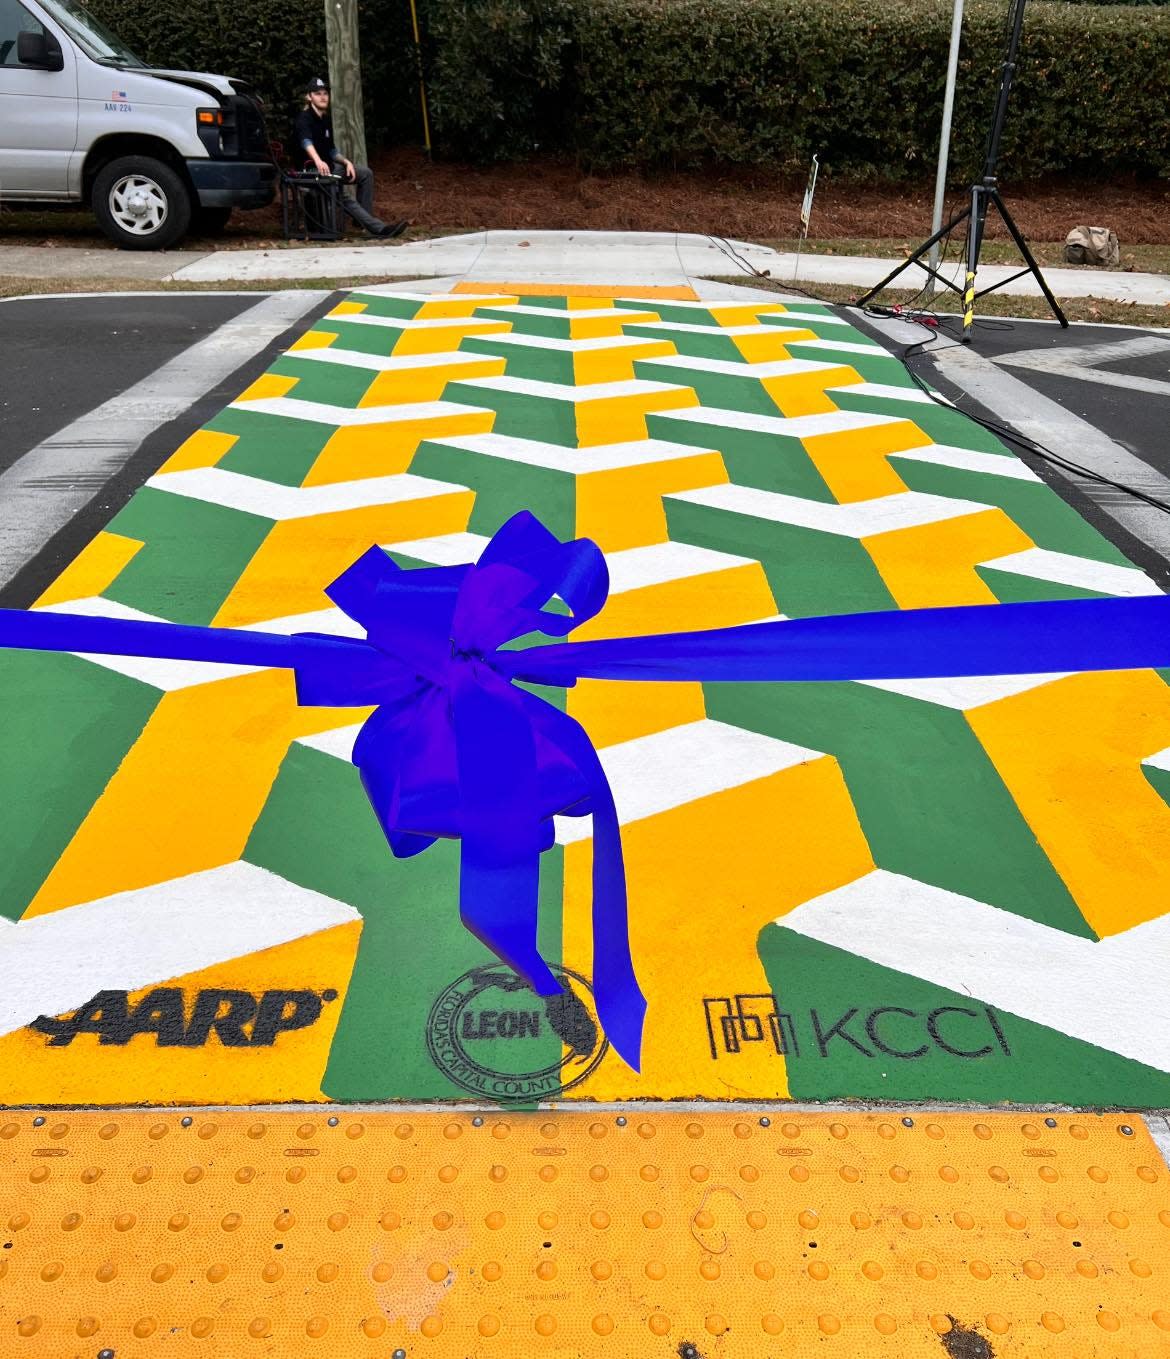 The latest crosswalk in the KCCI's Crosswalk to Classrooms series at W.T. Moore Elementary is elevated and decorated in the school's colors.